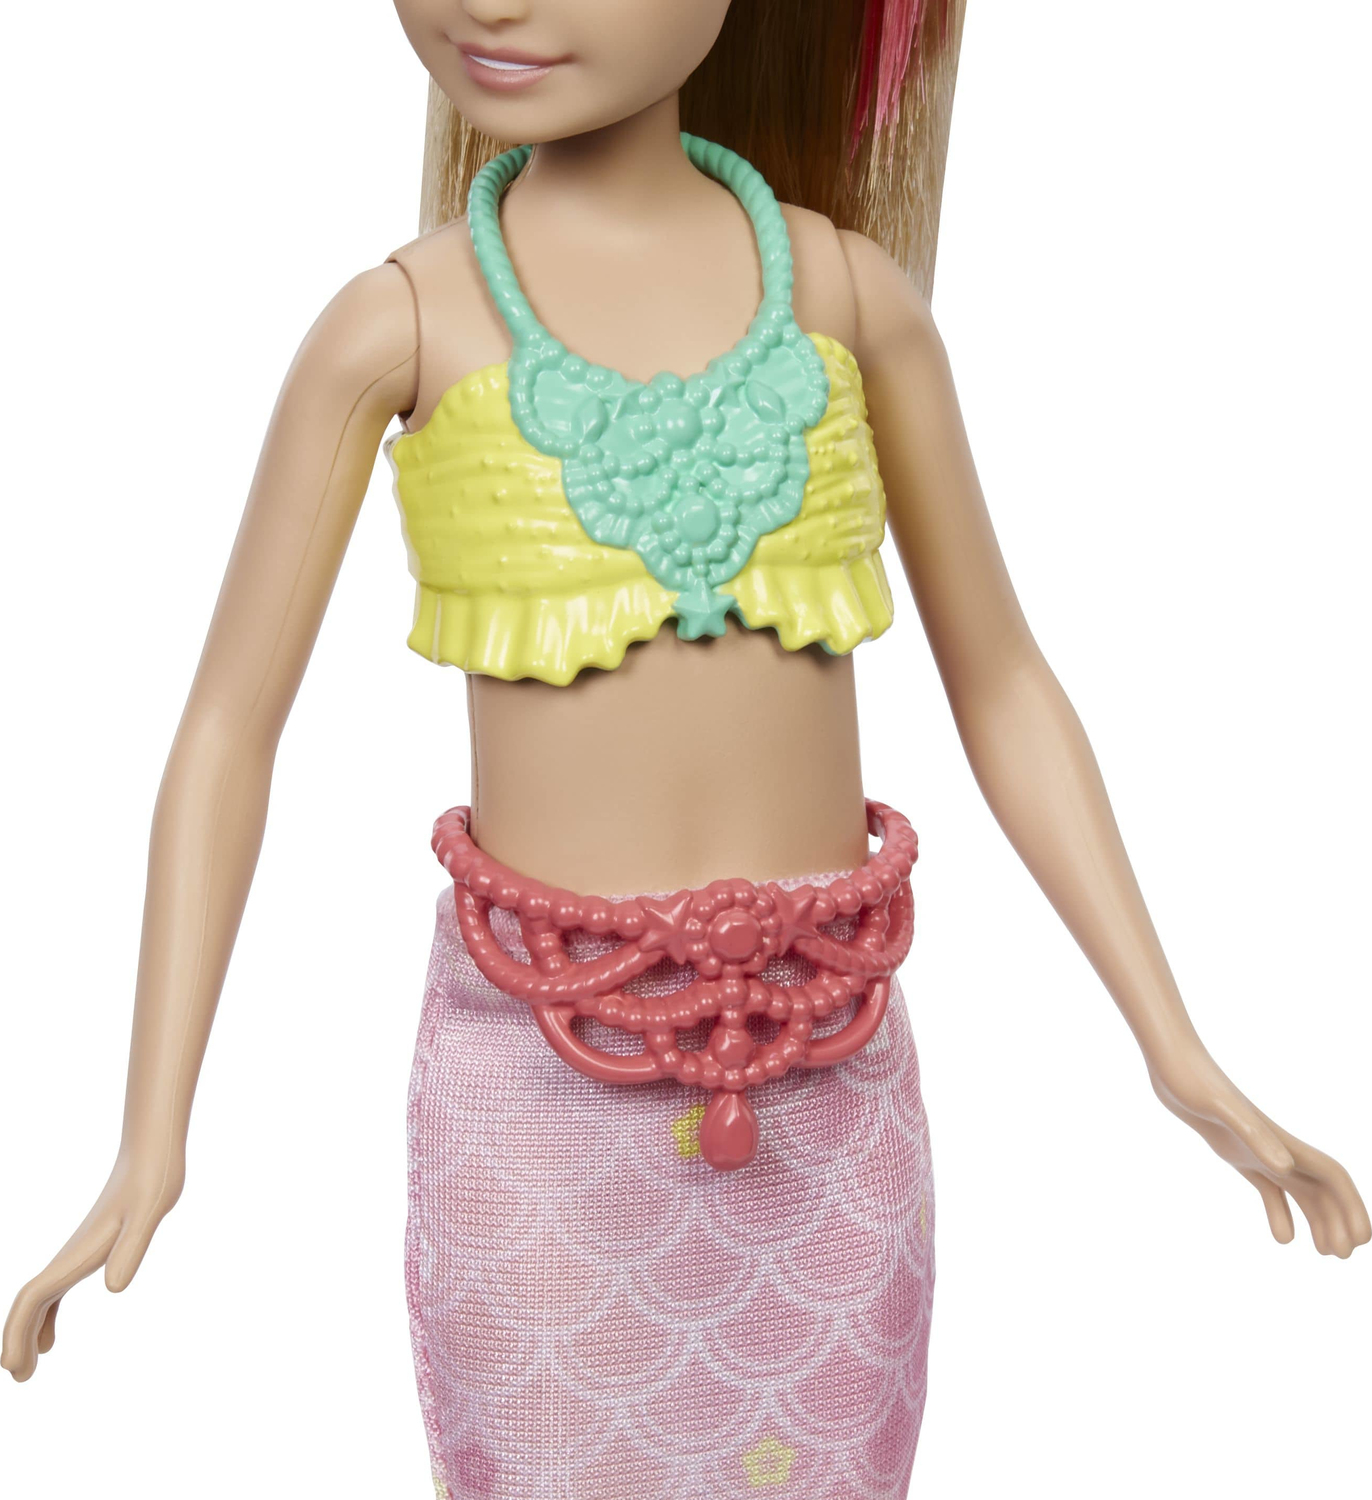 Barbie Mermaid Power Dolls, Fashions And Accessories